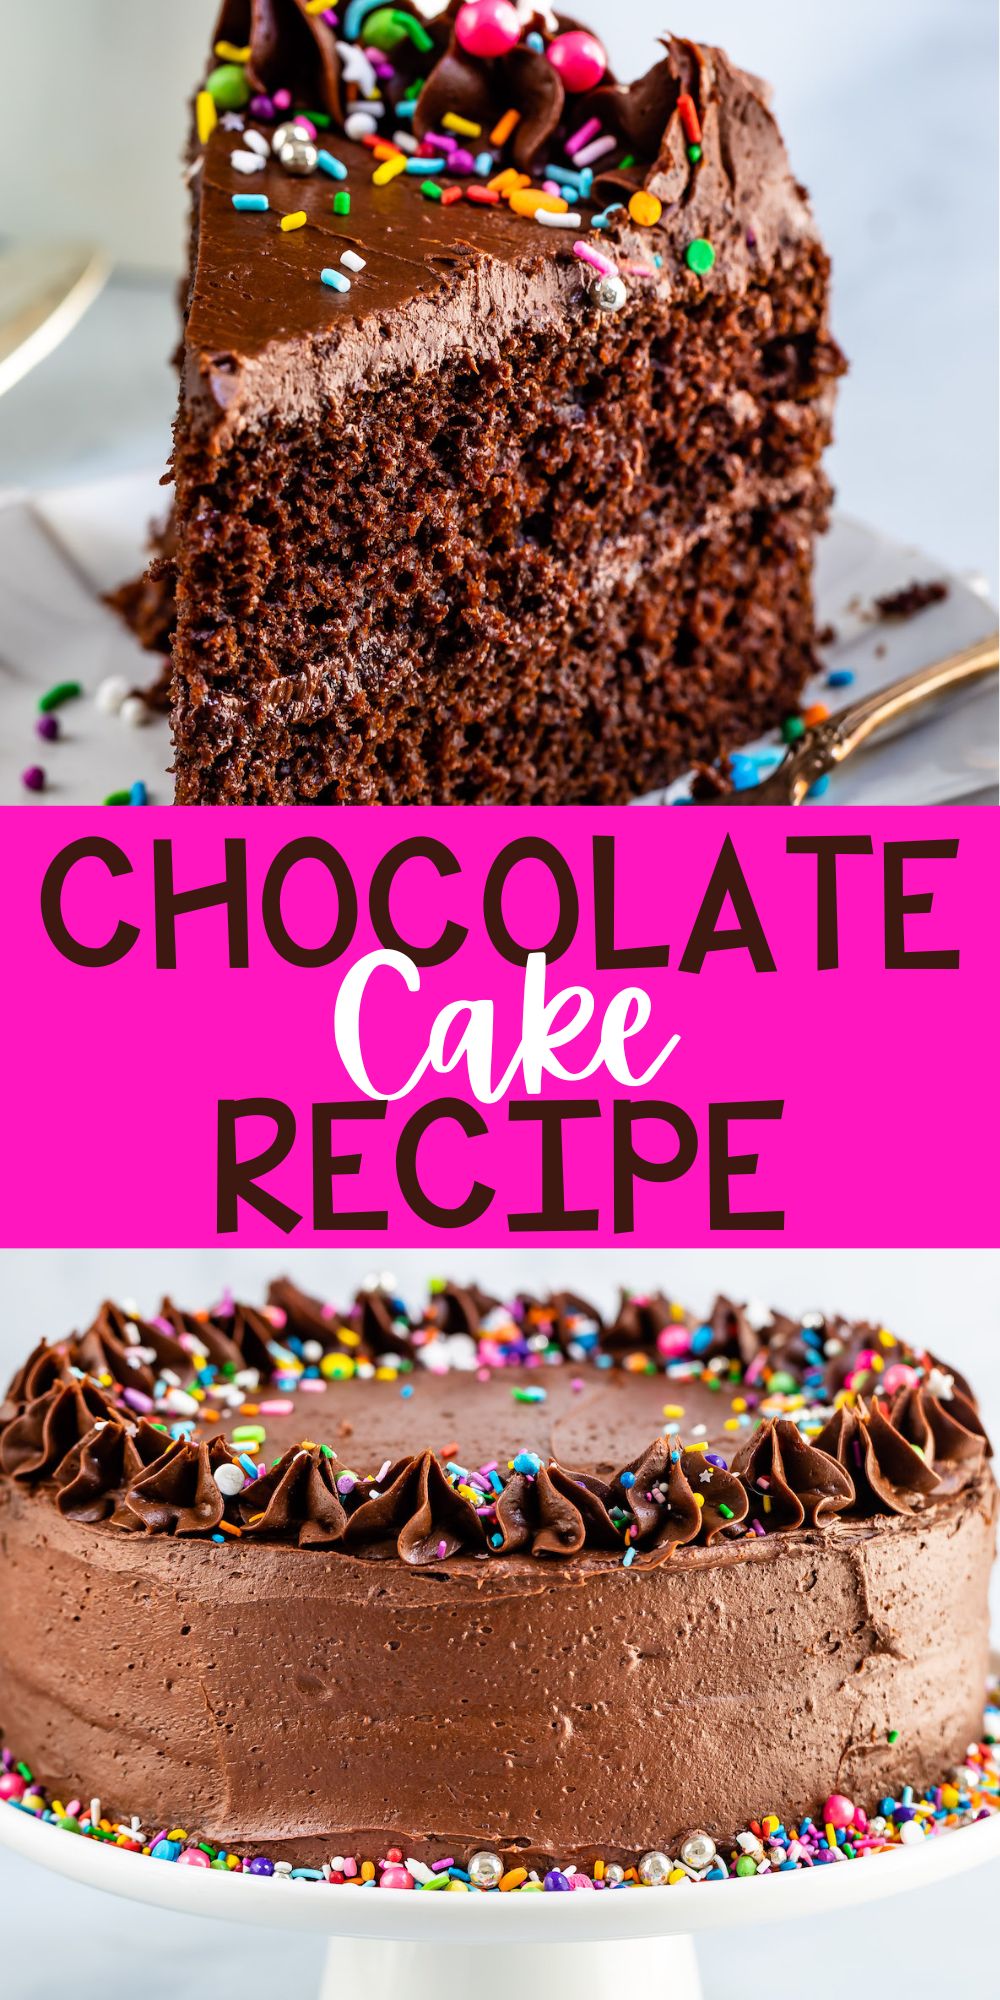 two photos of chocolate cake with chocolate frosting and covered in colorful sprinkles with words on the image.